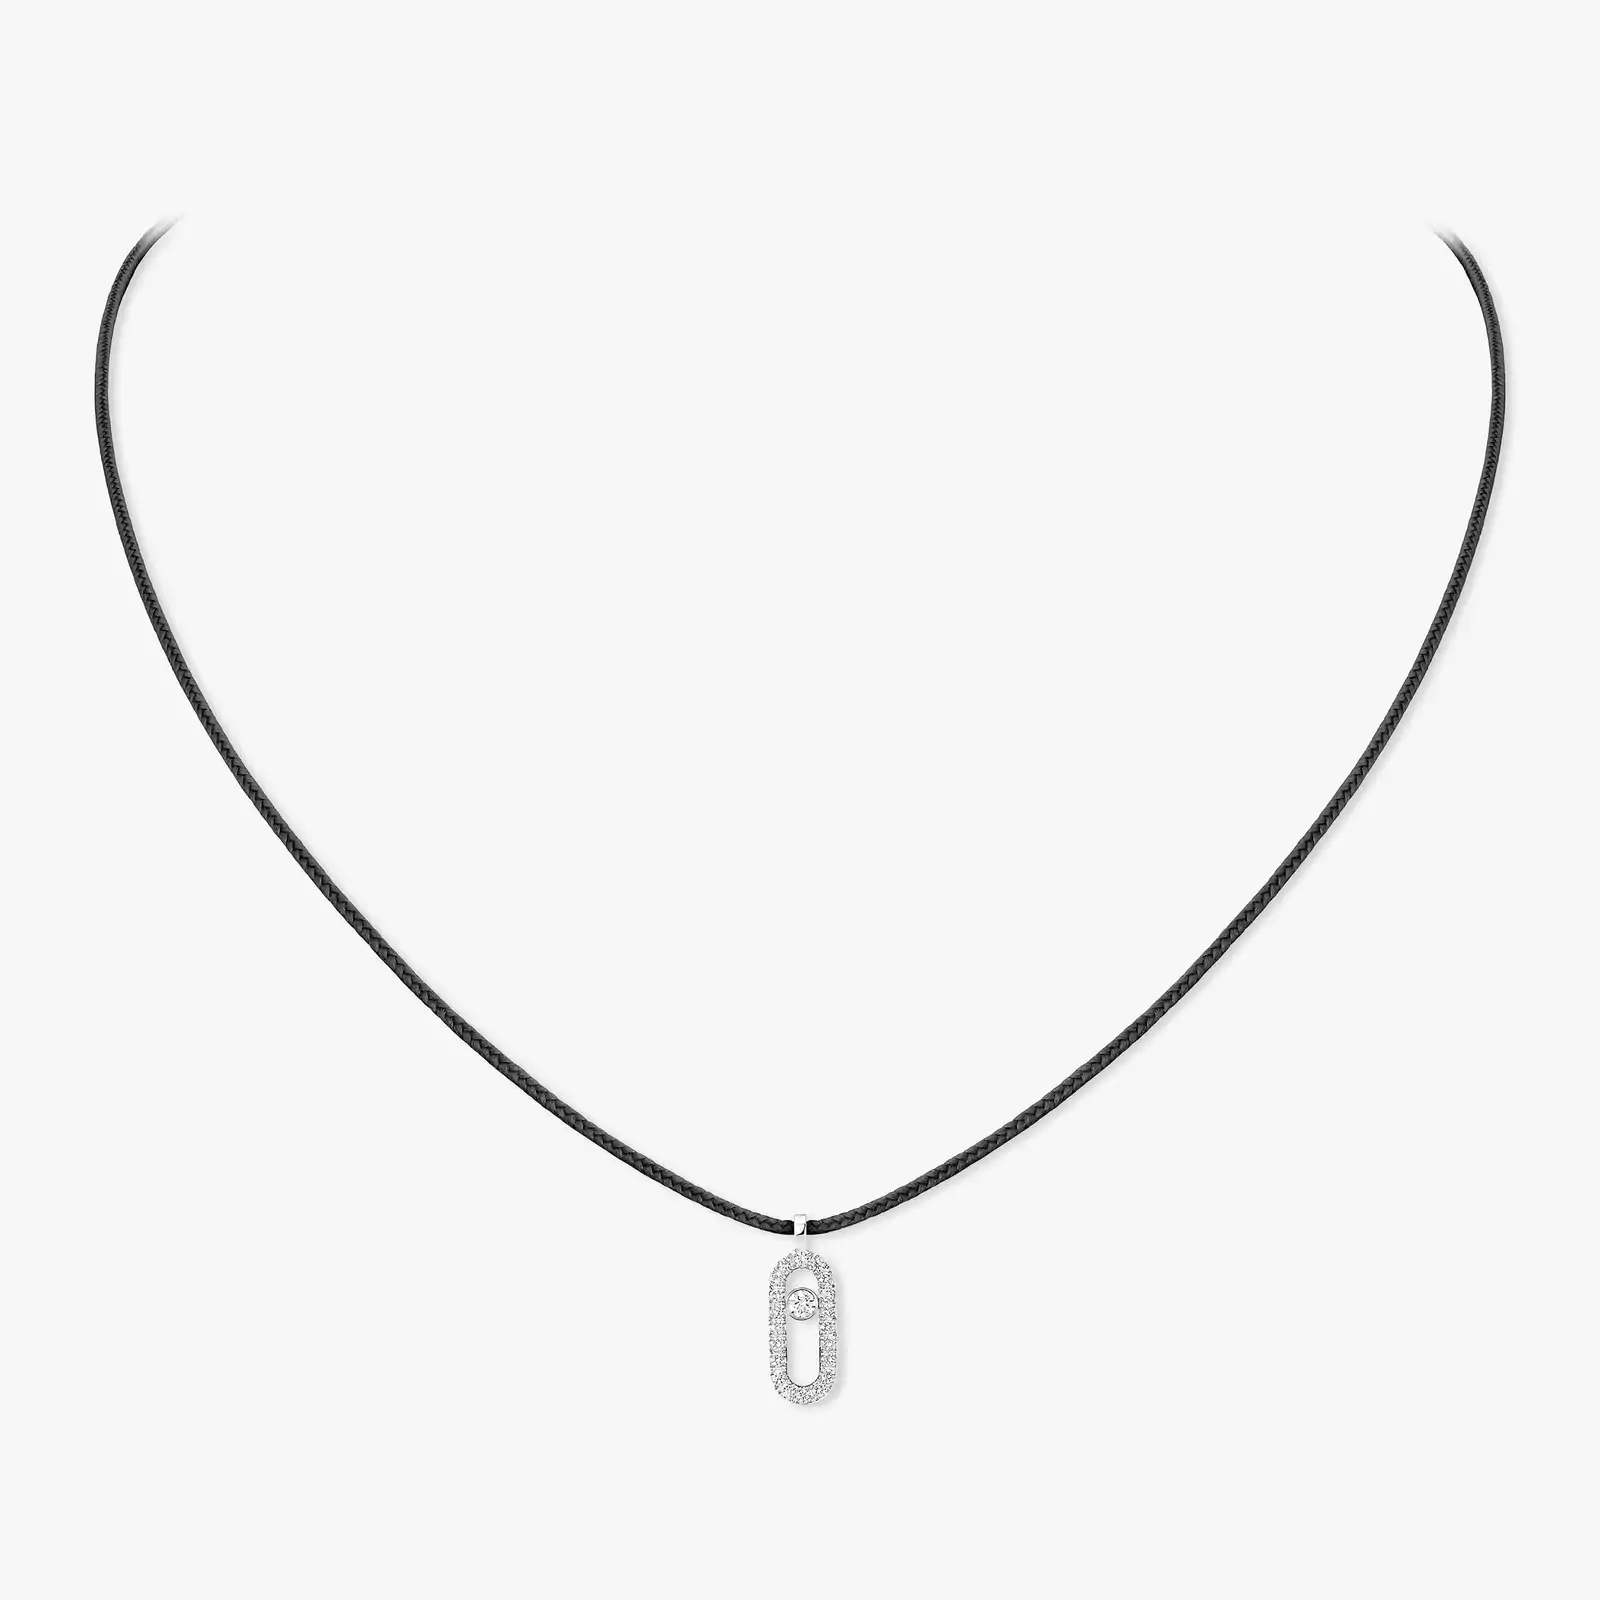 Necklace For Her White Gold Diamond Messika CARE(S) Black Cord Pavé Necklace 14142-WG